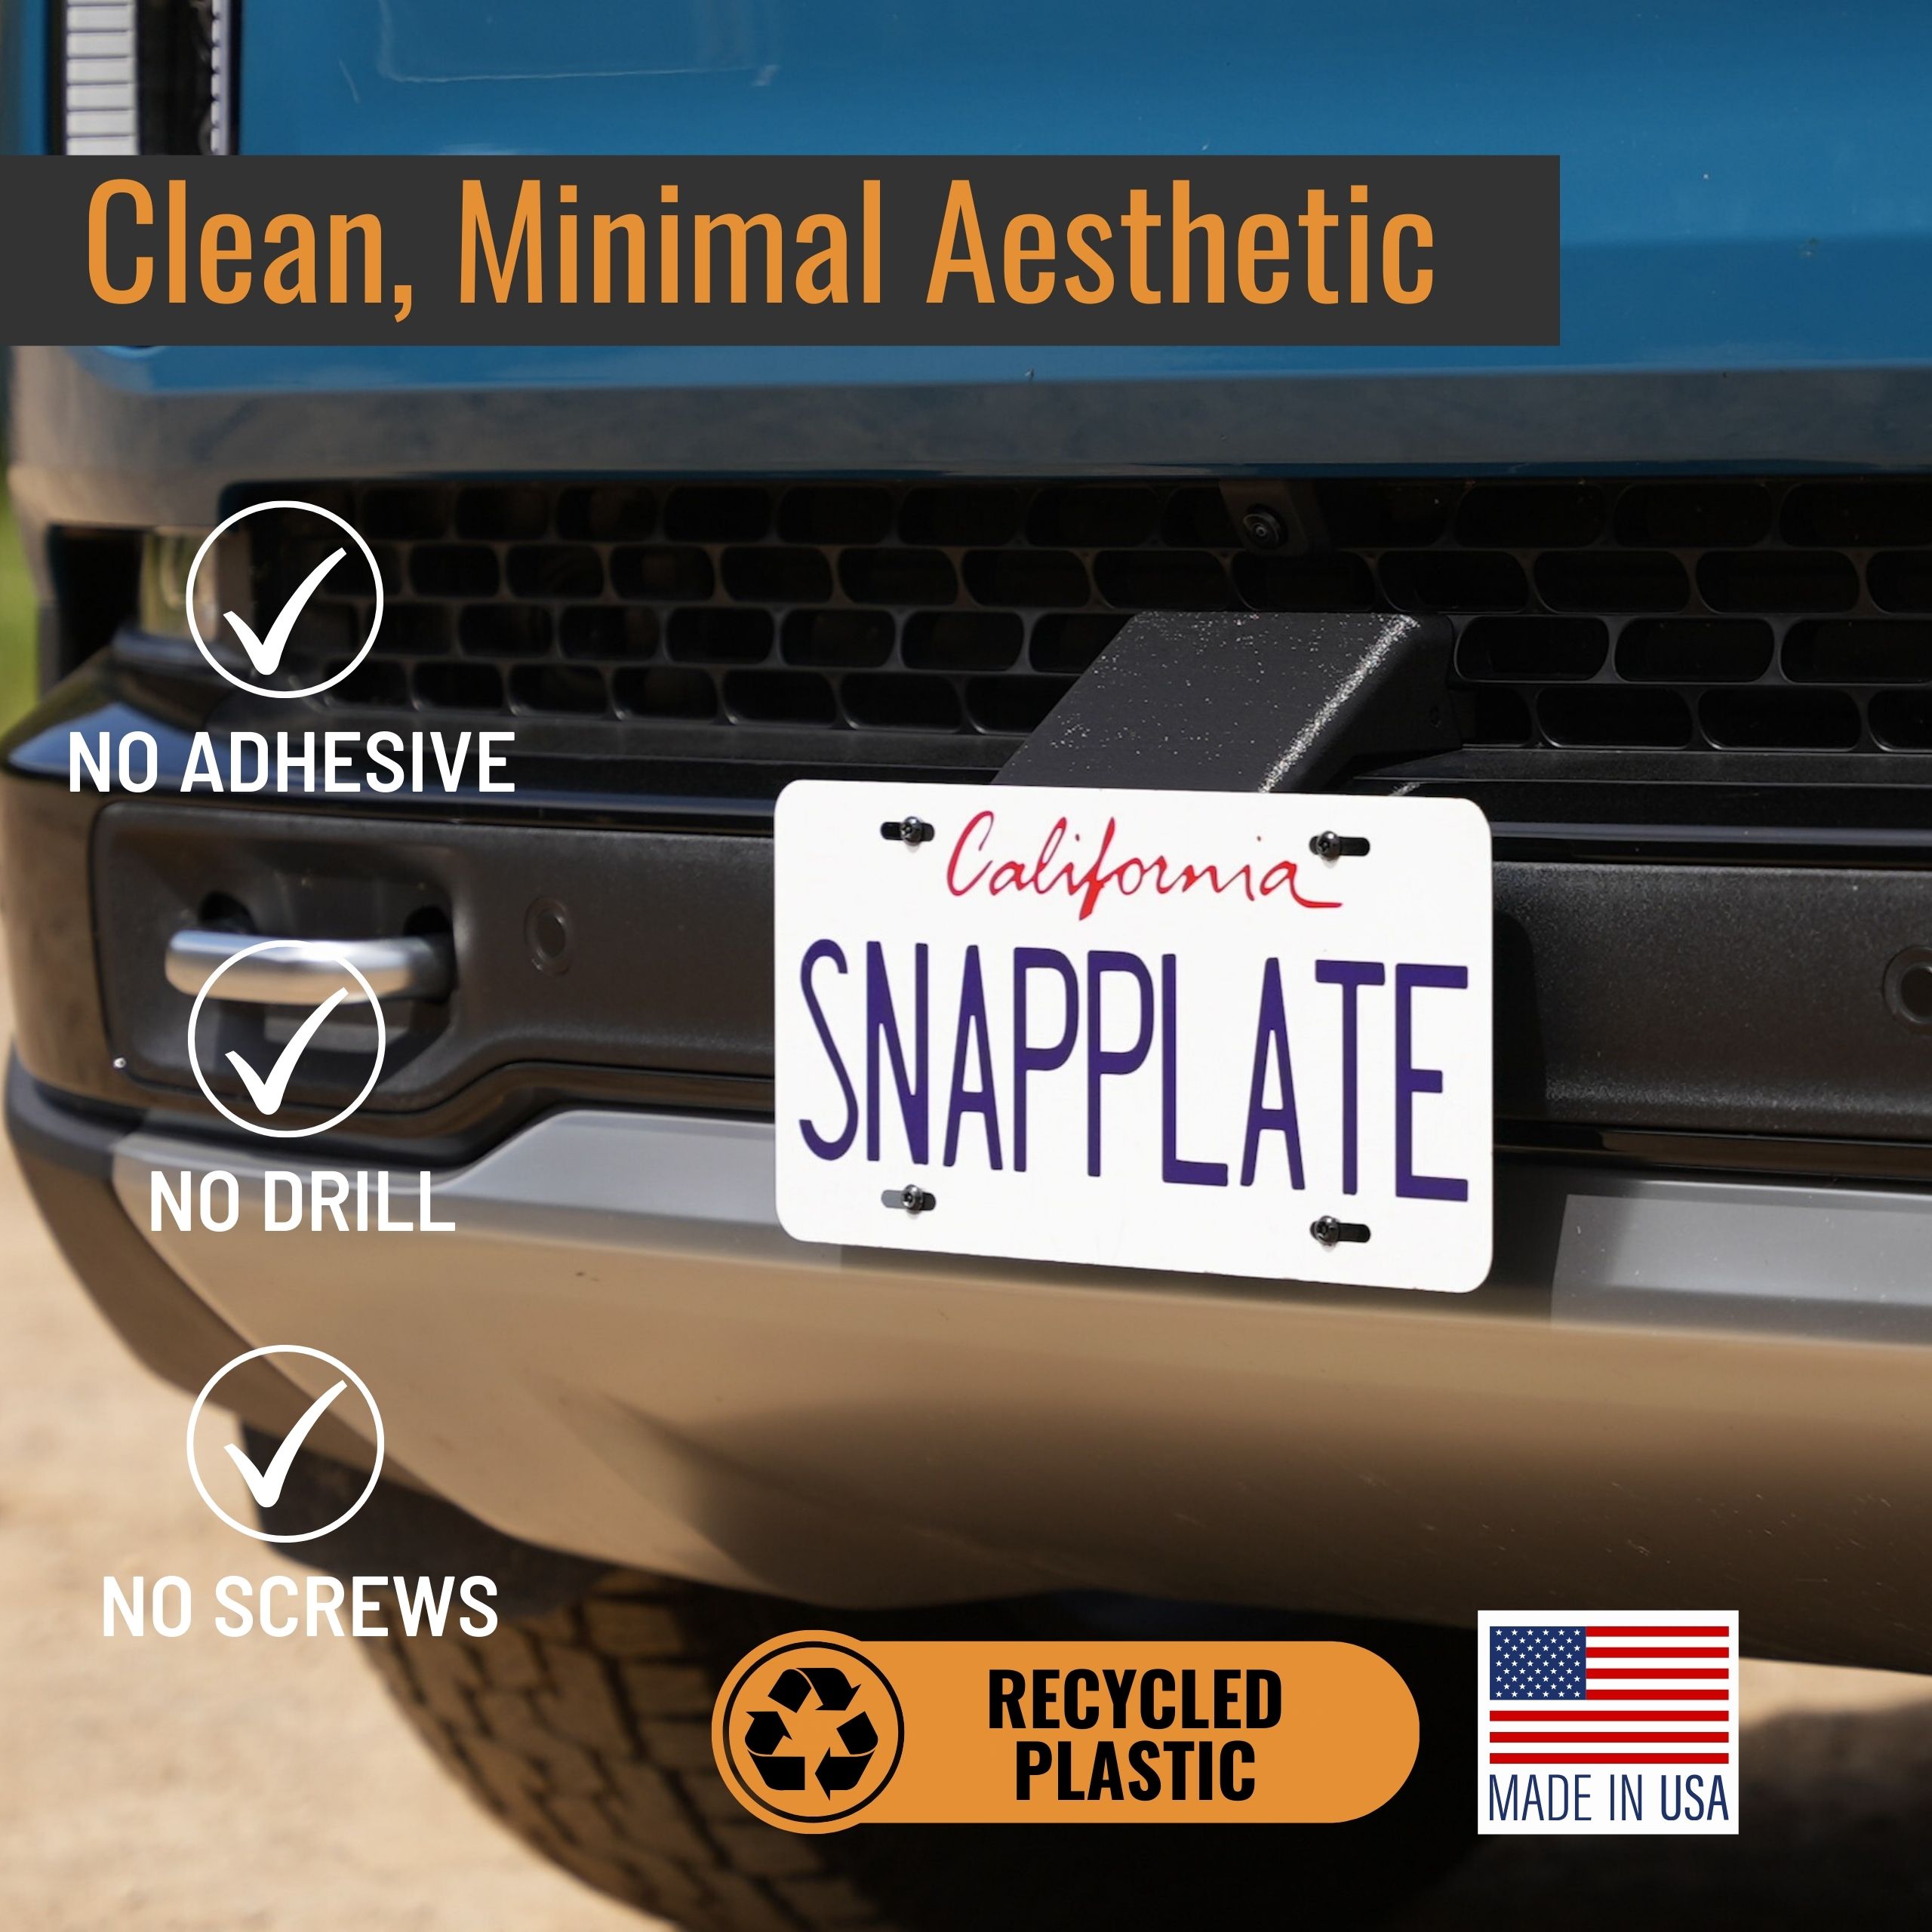 Rivian R1T R1S No-Drill, No-Adhesives, Front License Plate Mounts - SnapPlate for Rivian R1T & R1S - Gen 2 Height and Grille Depth Adjustable 3